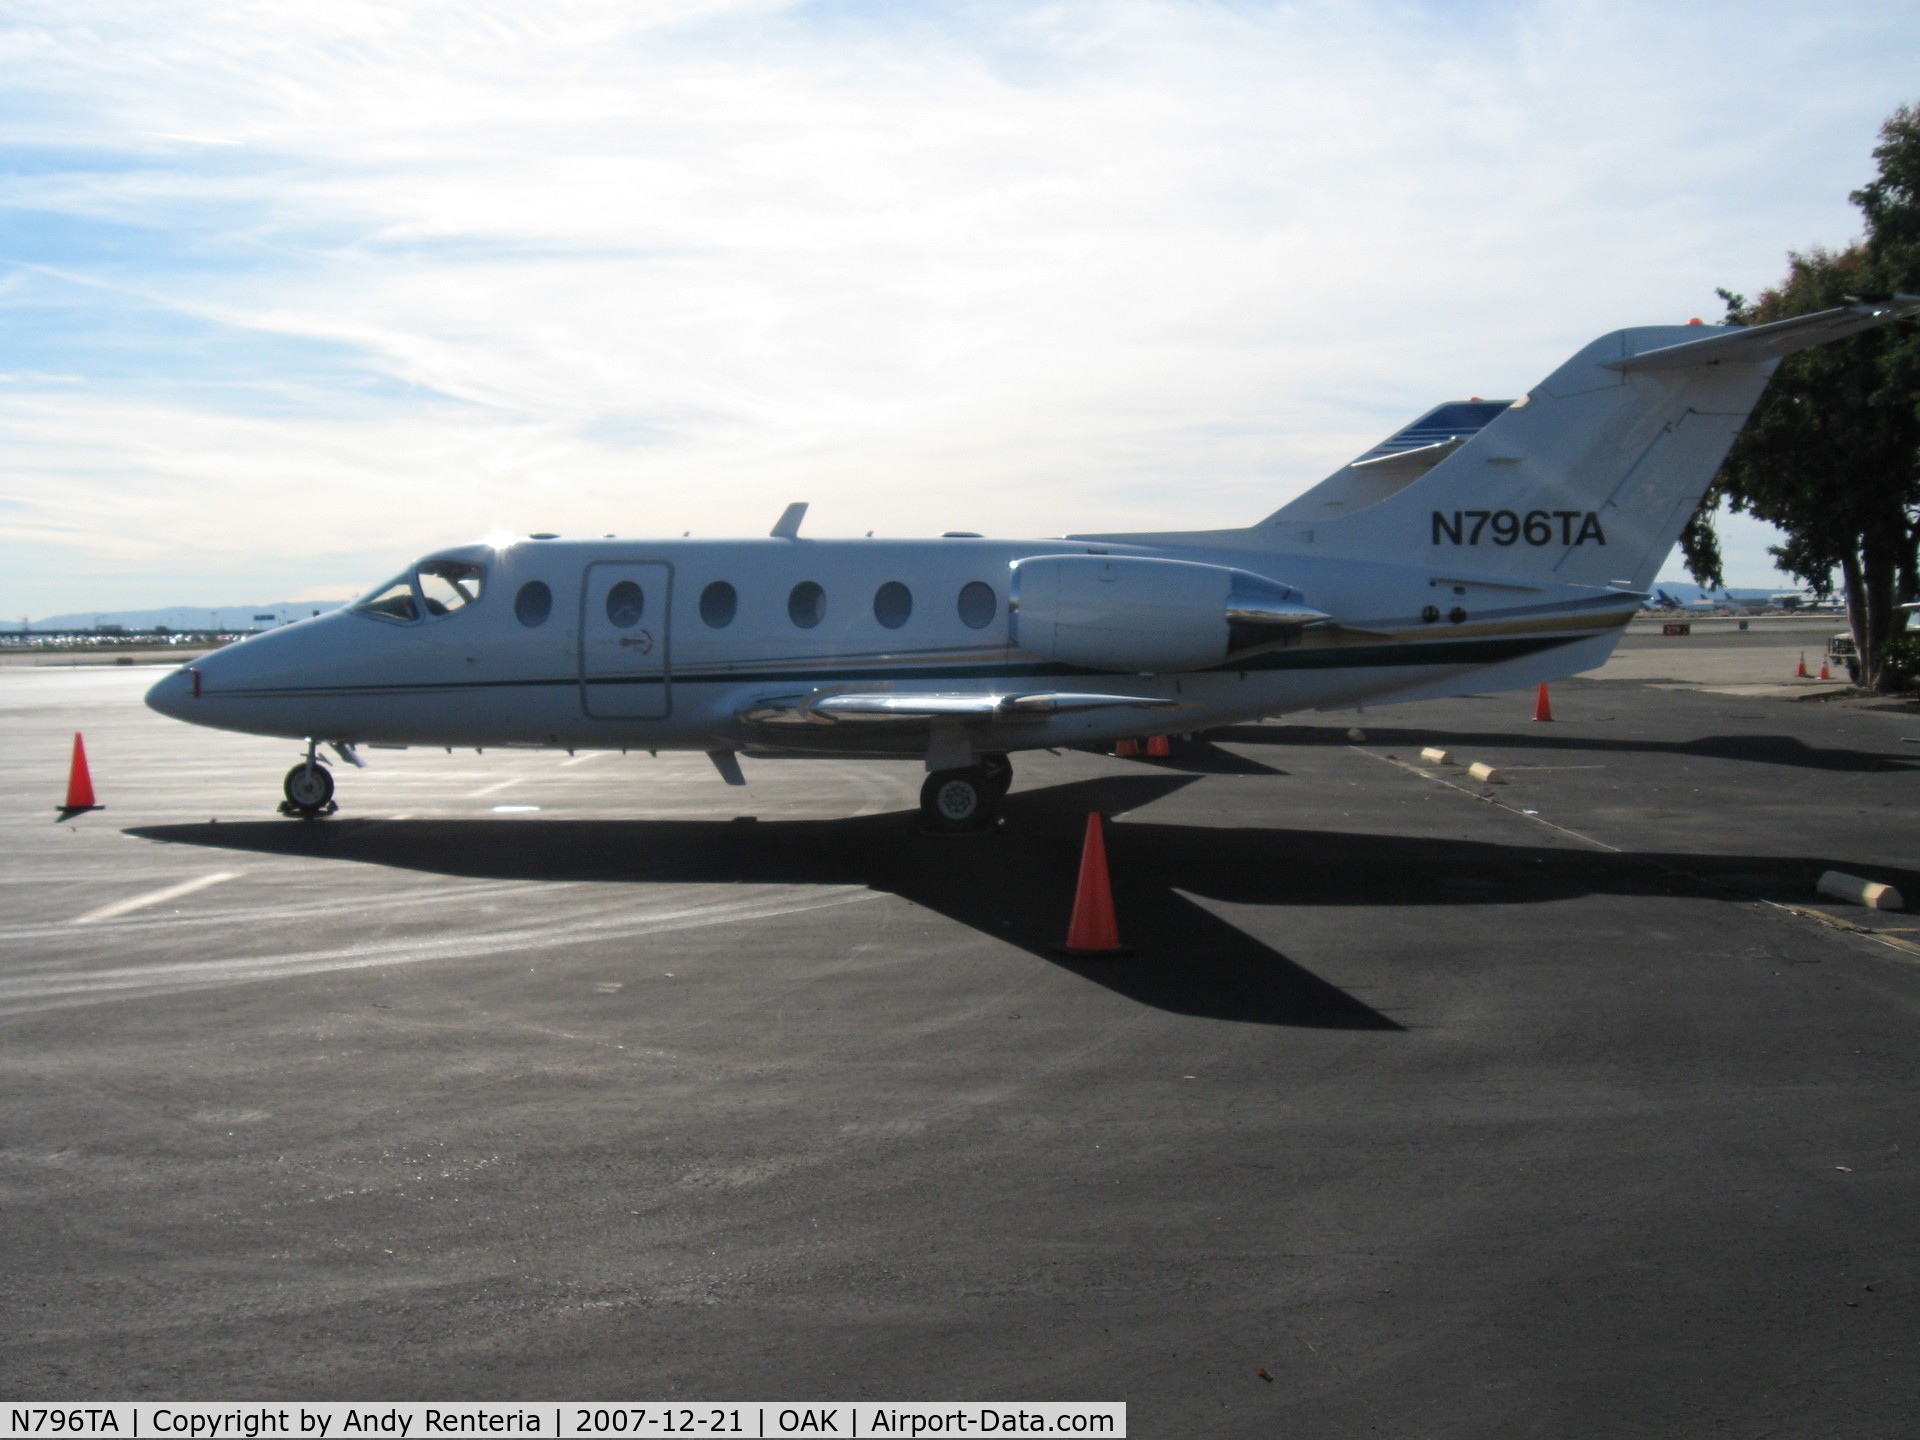 N796TA, 2000 Beechcraft 400A Beechjet C/N RK-289, BECAUSE BACKLIT PHOTOS ARE MORE MYSTERIOUS